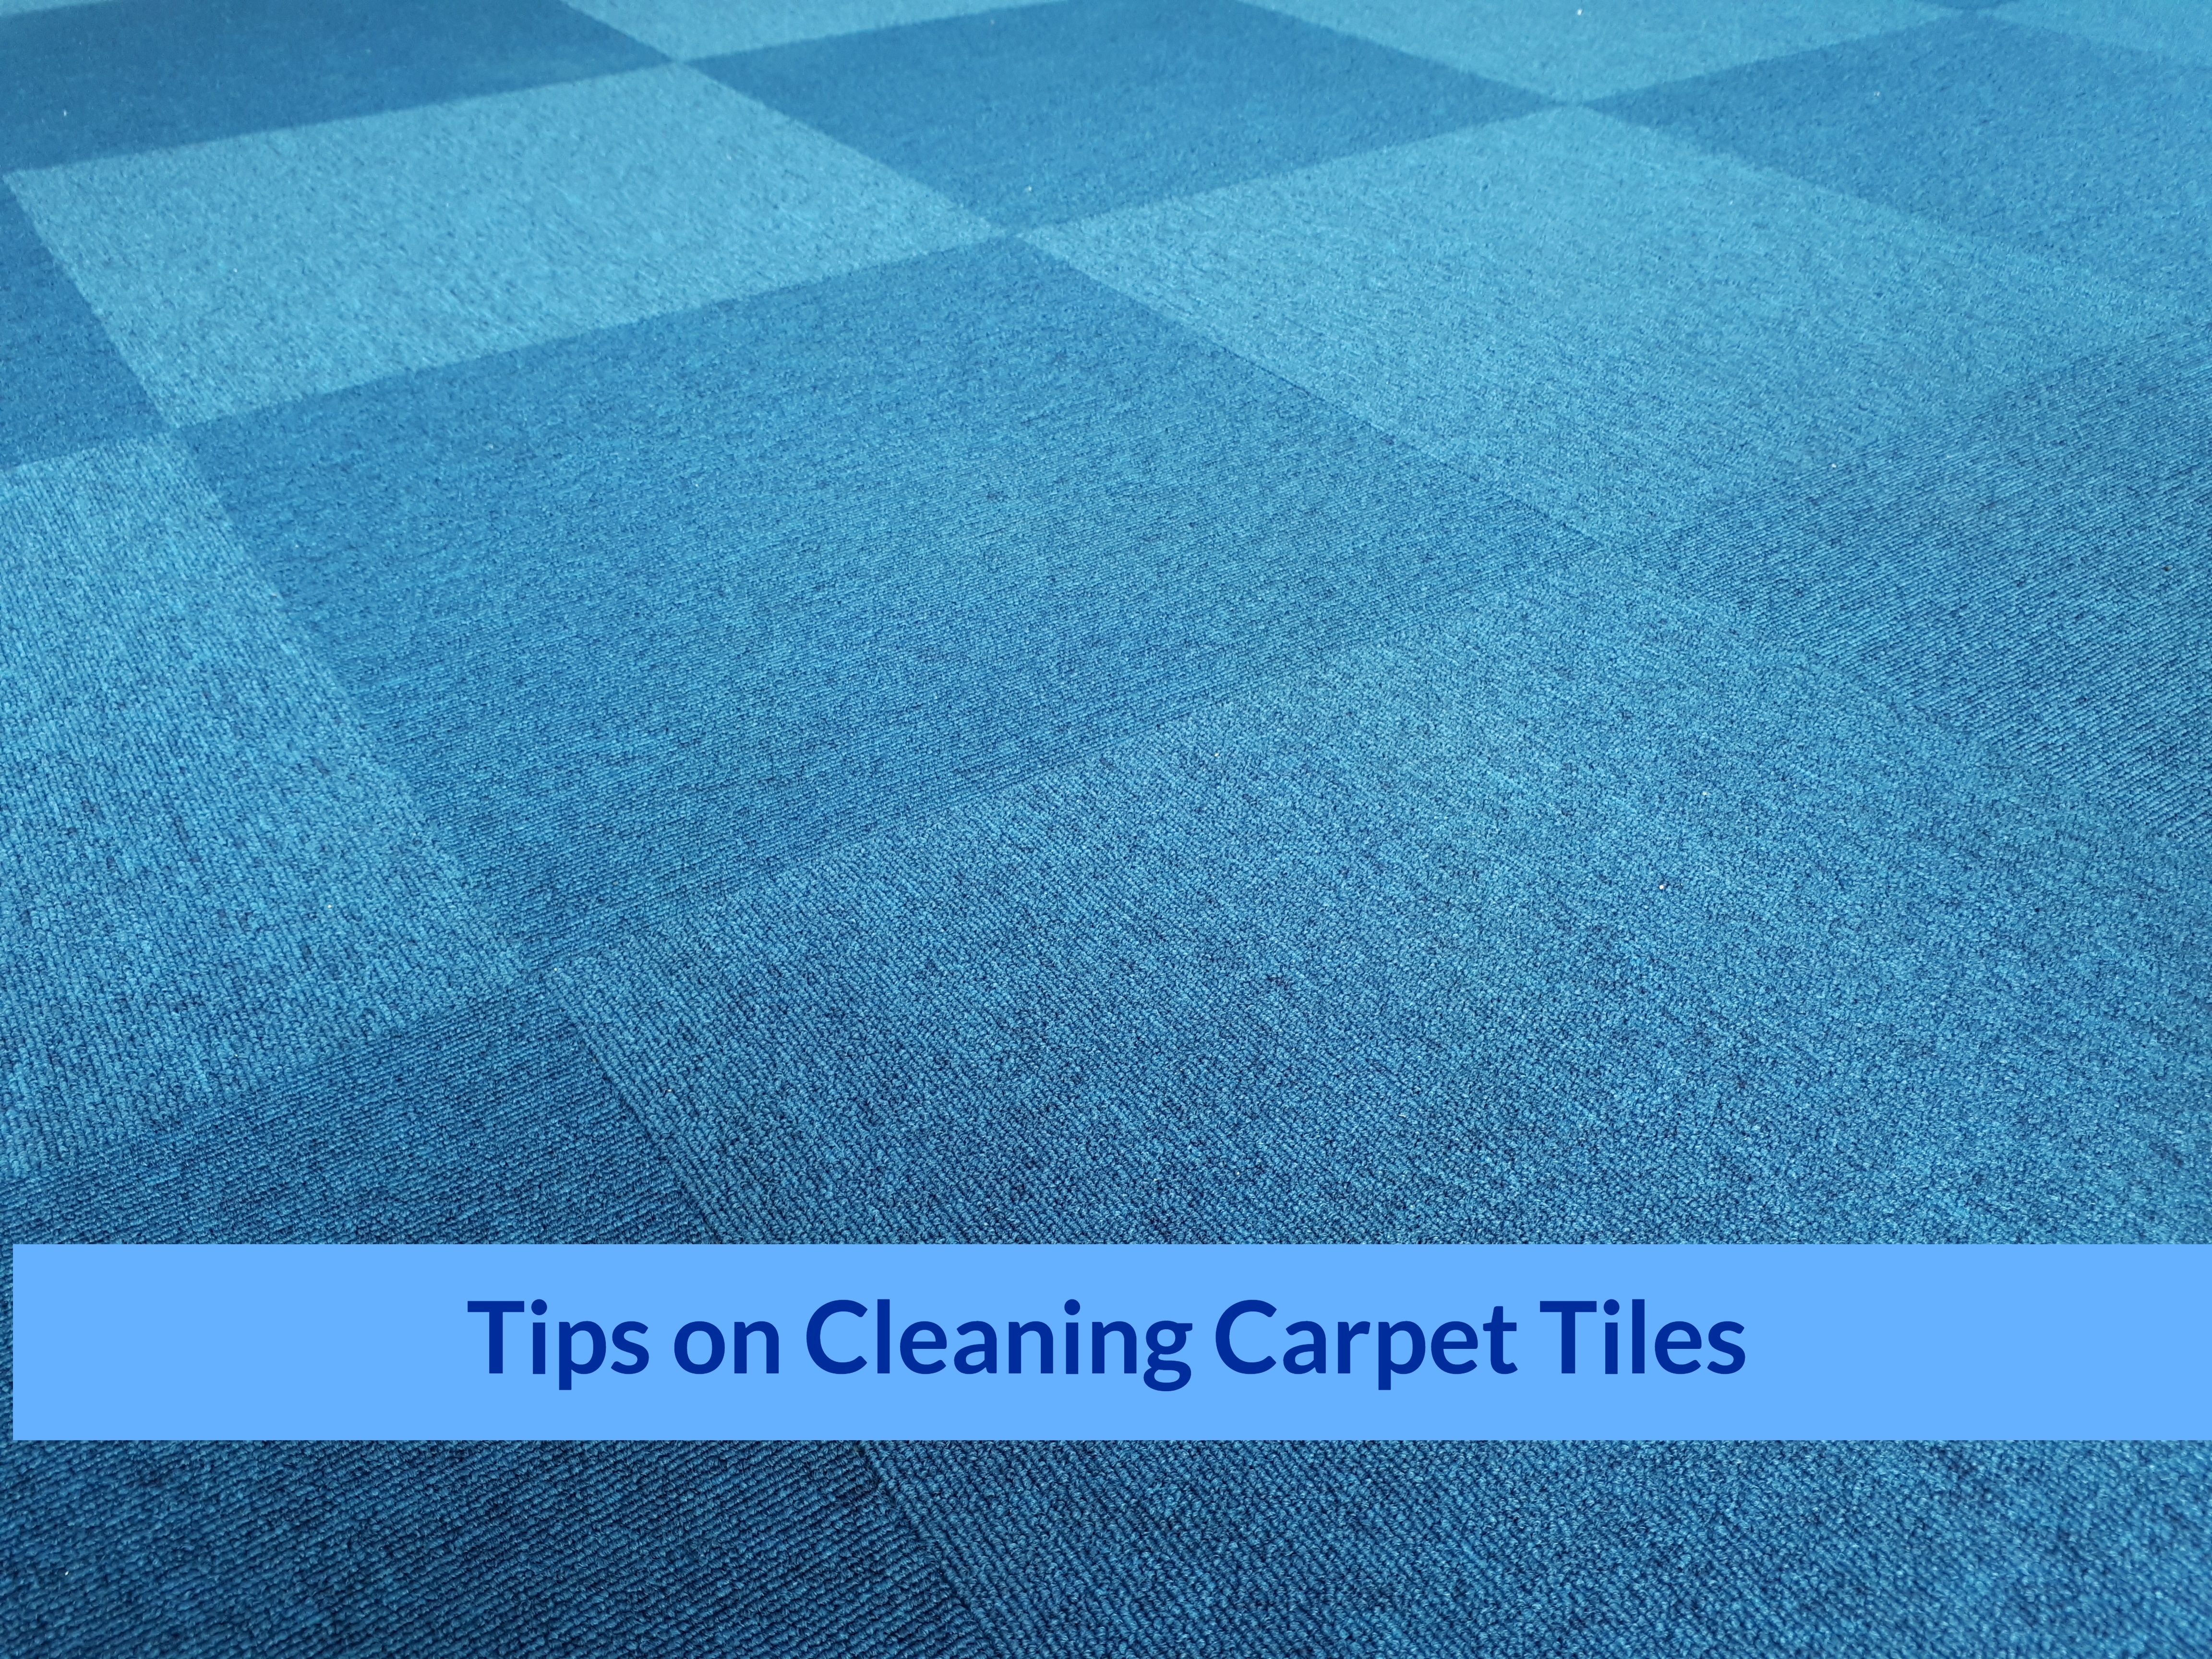 Tips on Cleaning Carpet Tiles